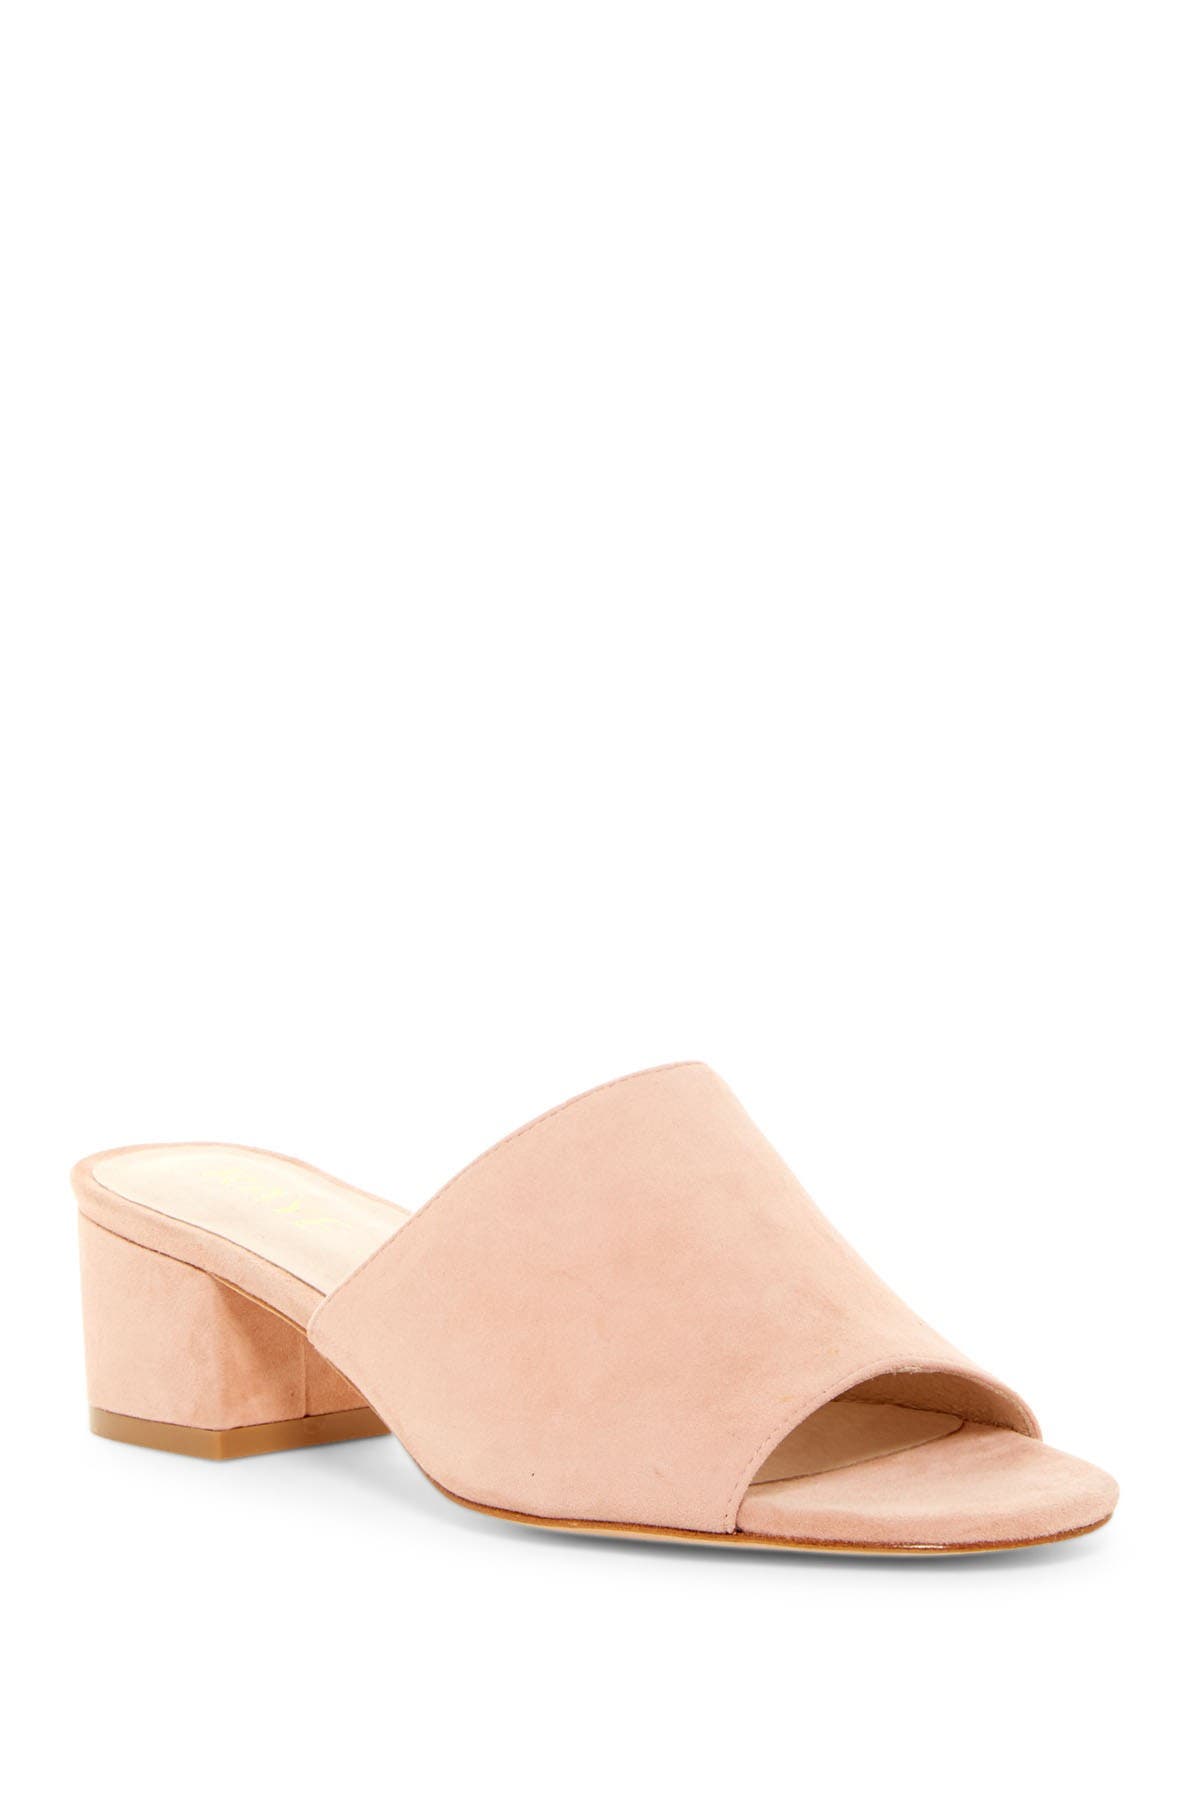 raye shoes nordstrom